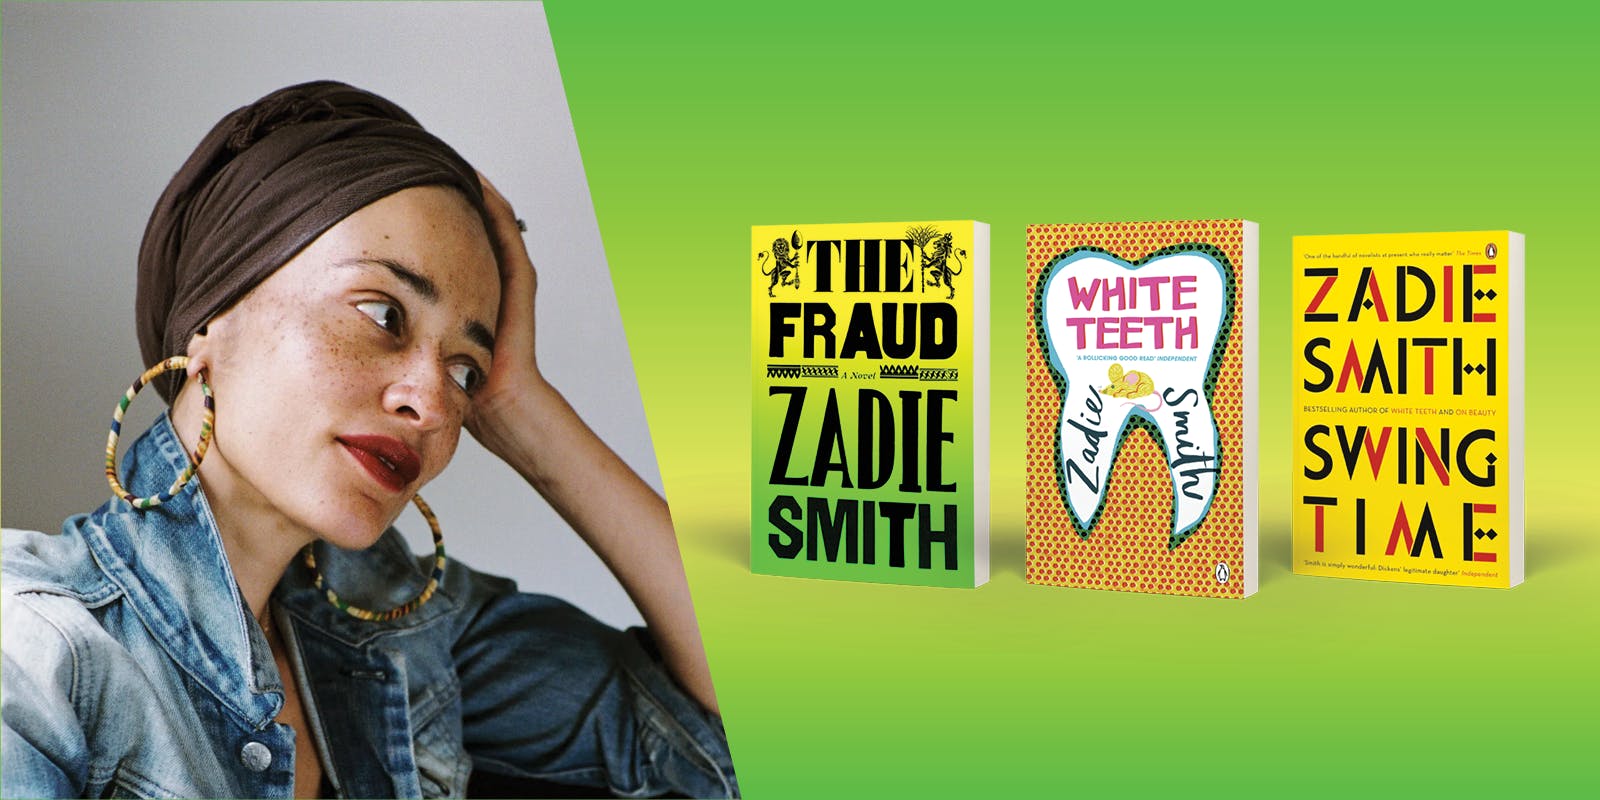 An ultimate guide to Zadie Smith